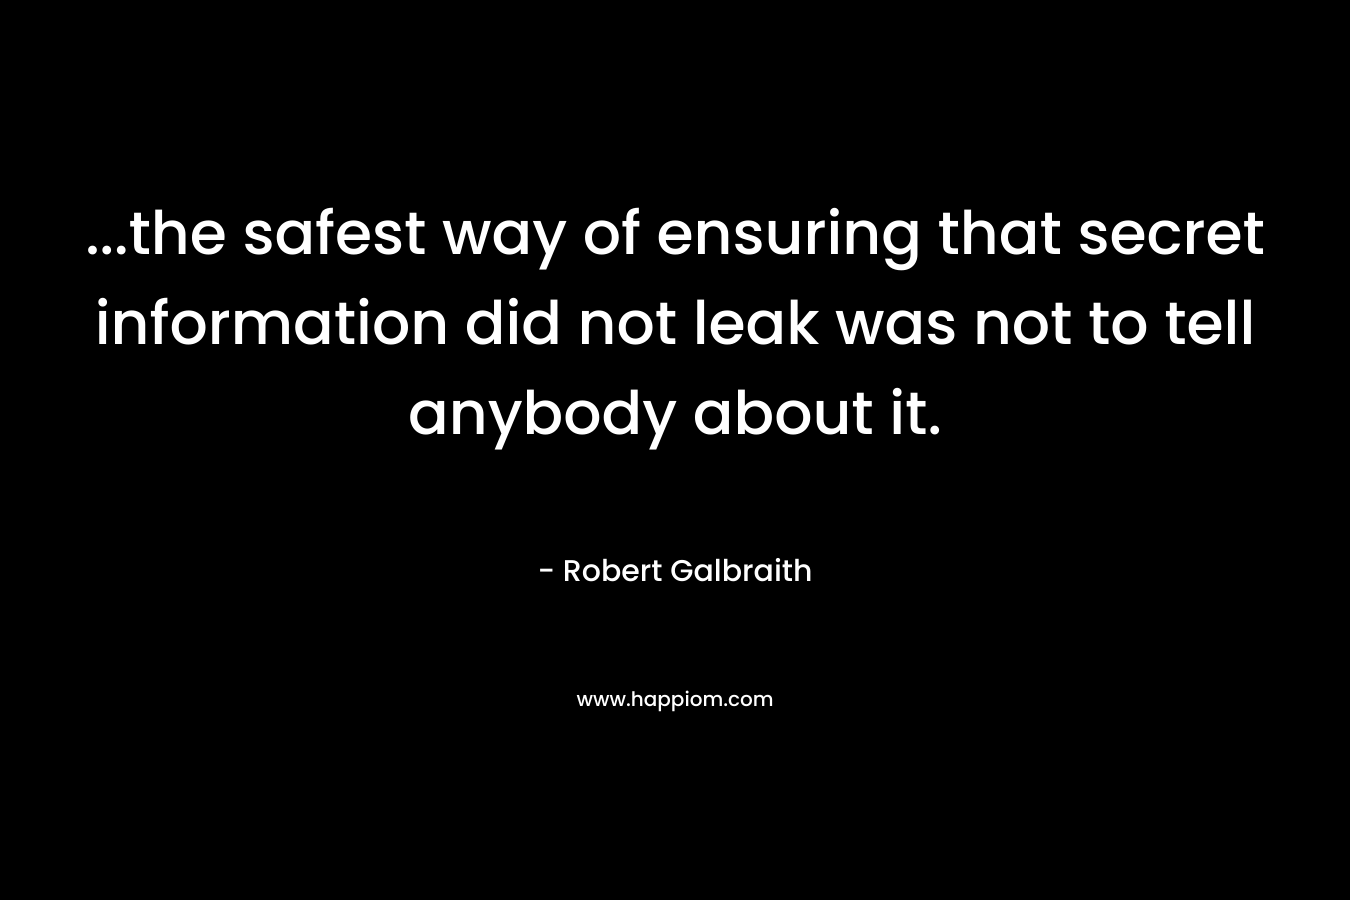 …the safest way of ensuring that secret information did not leak was not to tell anybody about it. – Robert Galbraith